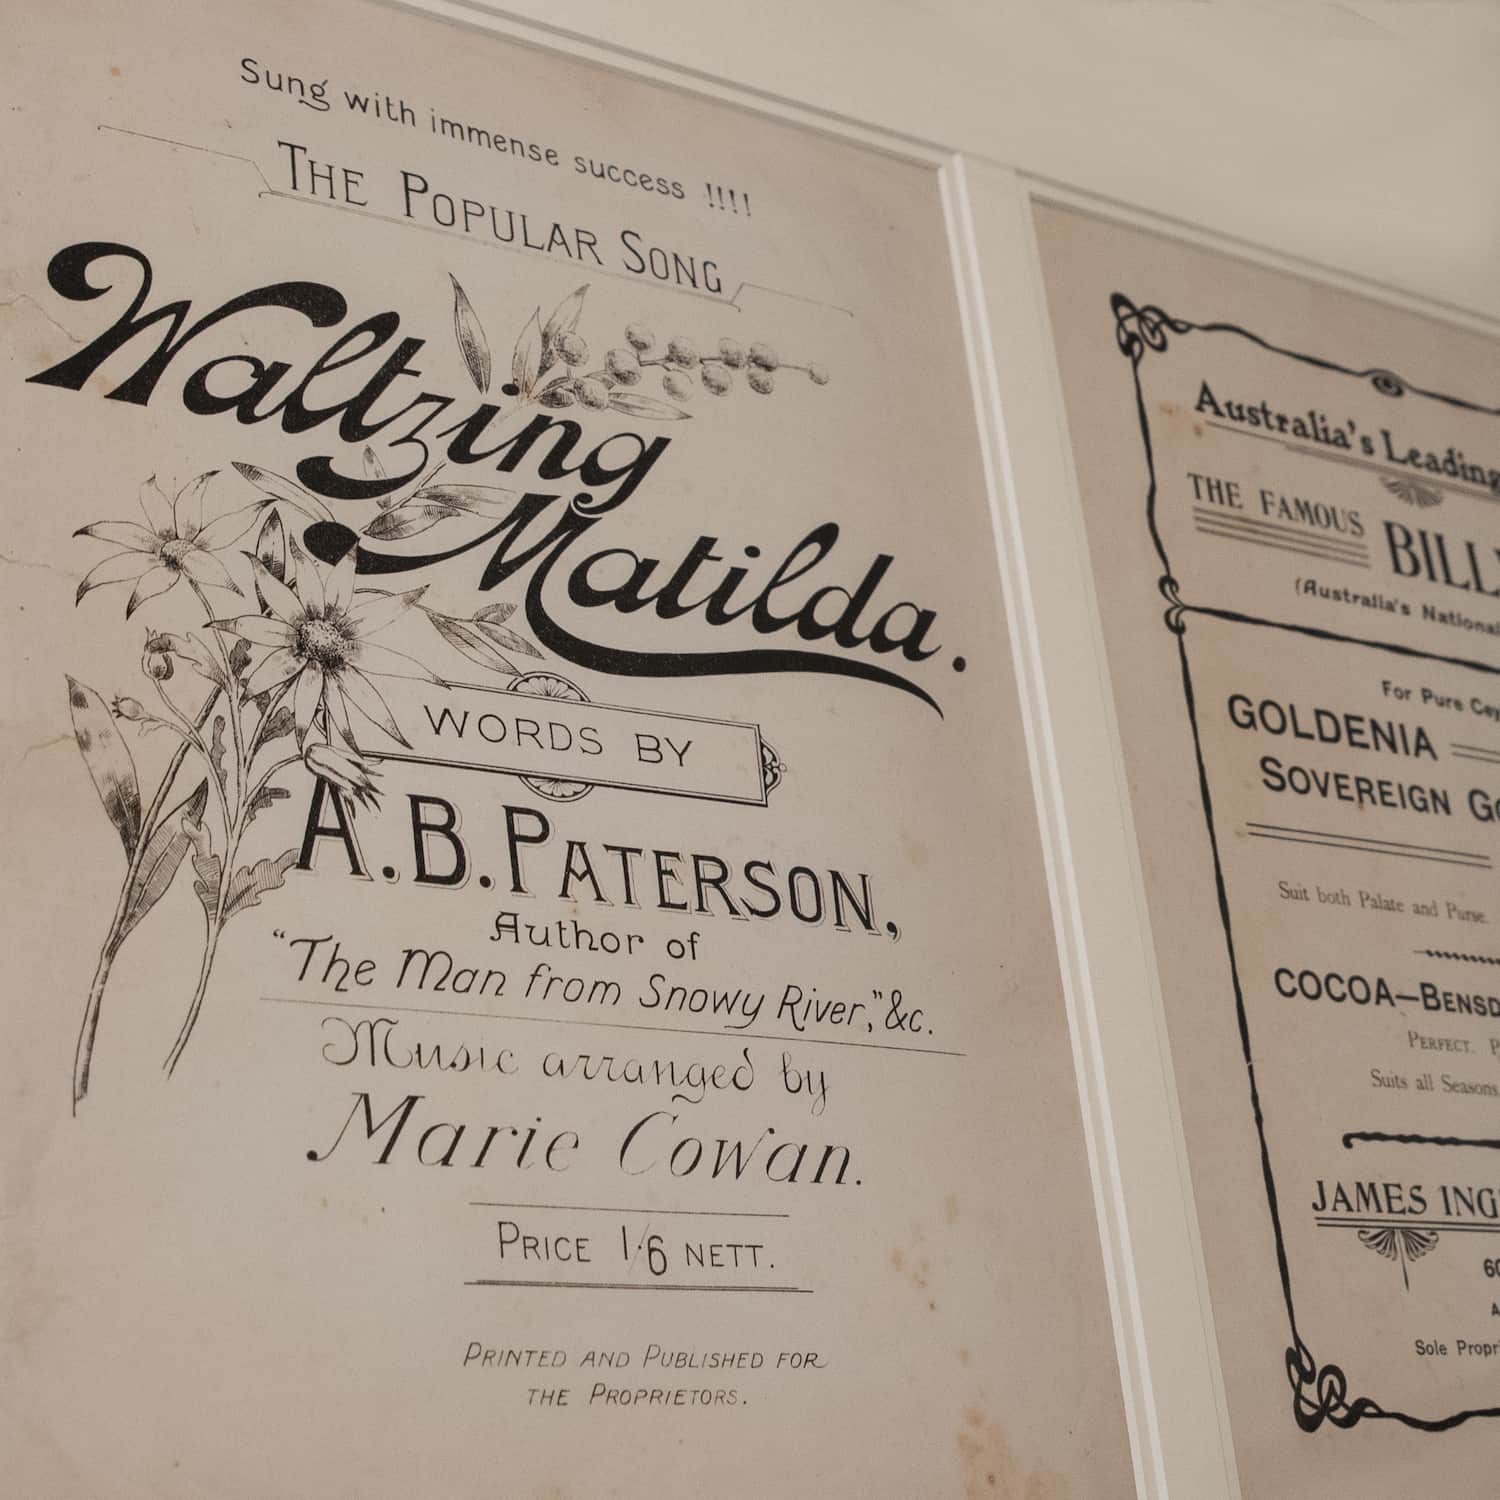 Old-fashioned poster advertising A.B.Paterson's Waltzing Matilda song